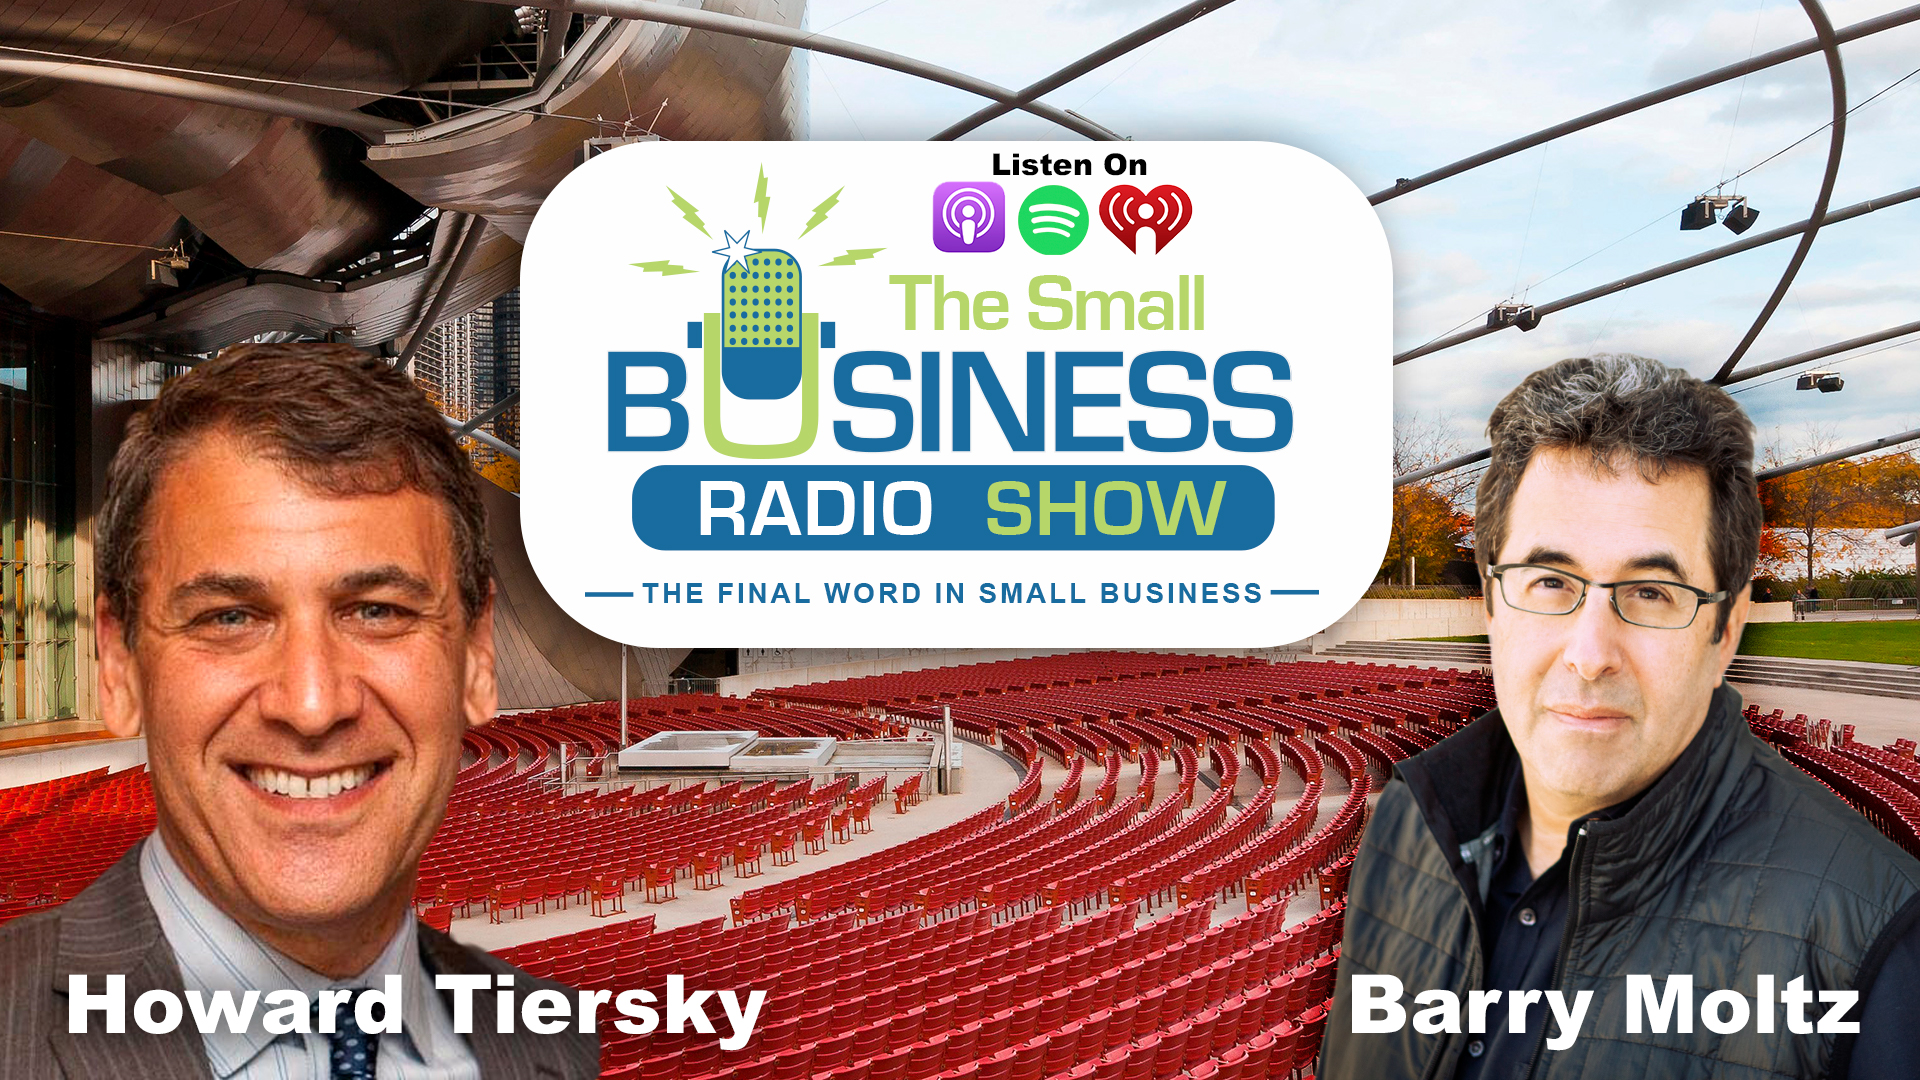 Howard Tiersky on The Small Business Radio Show